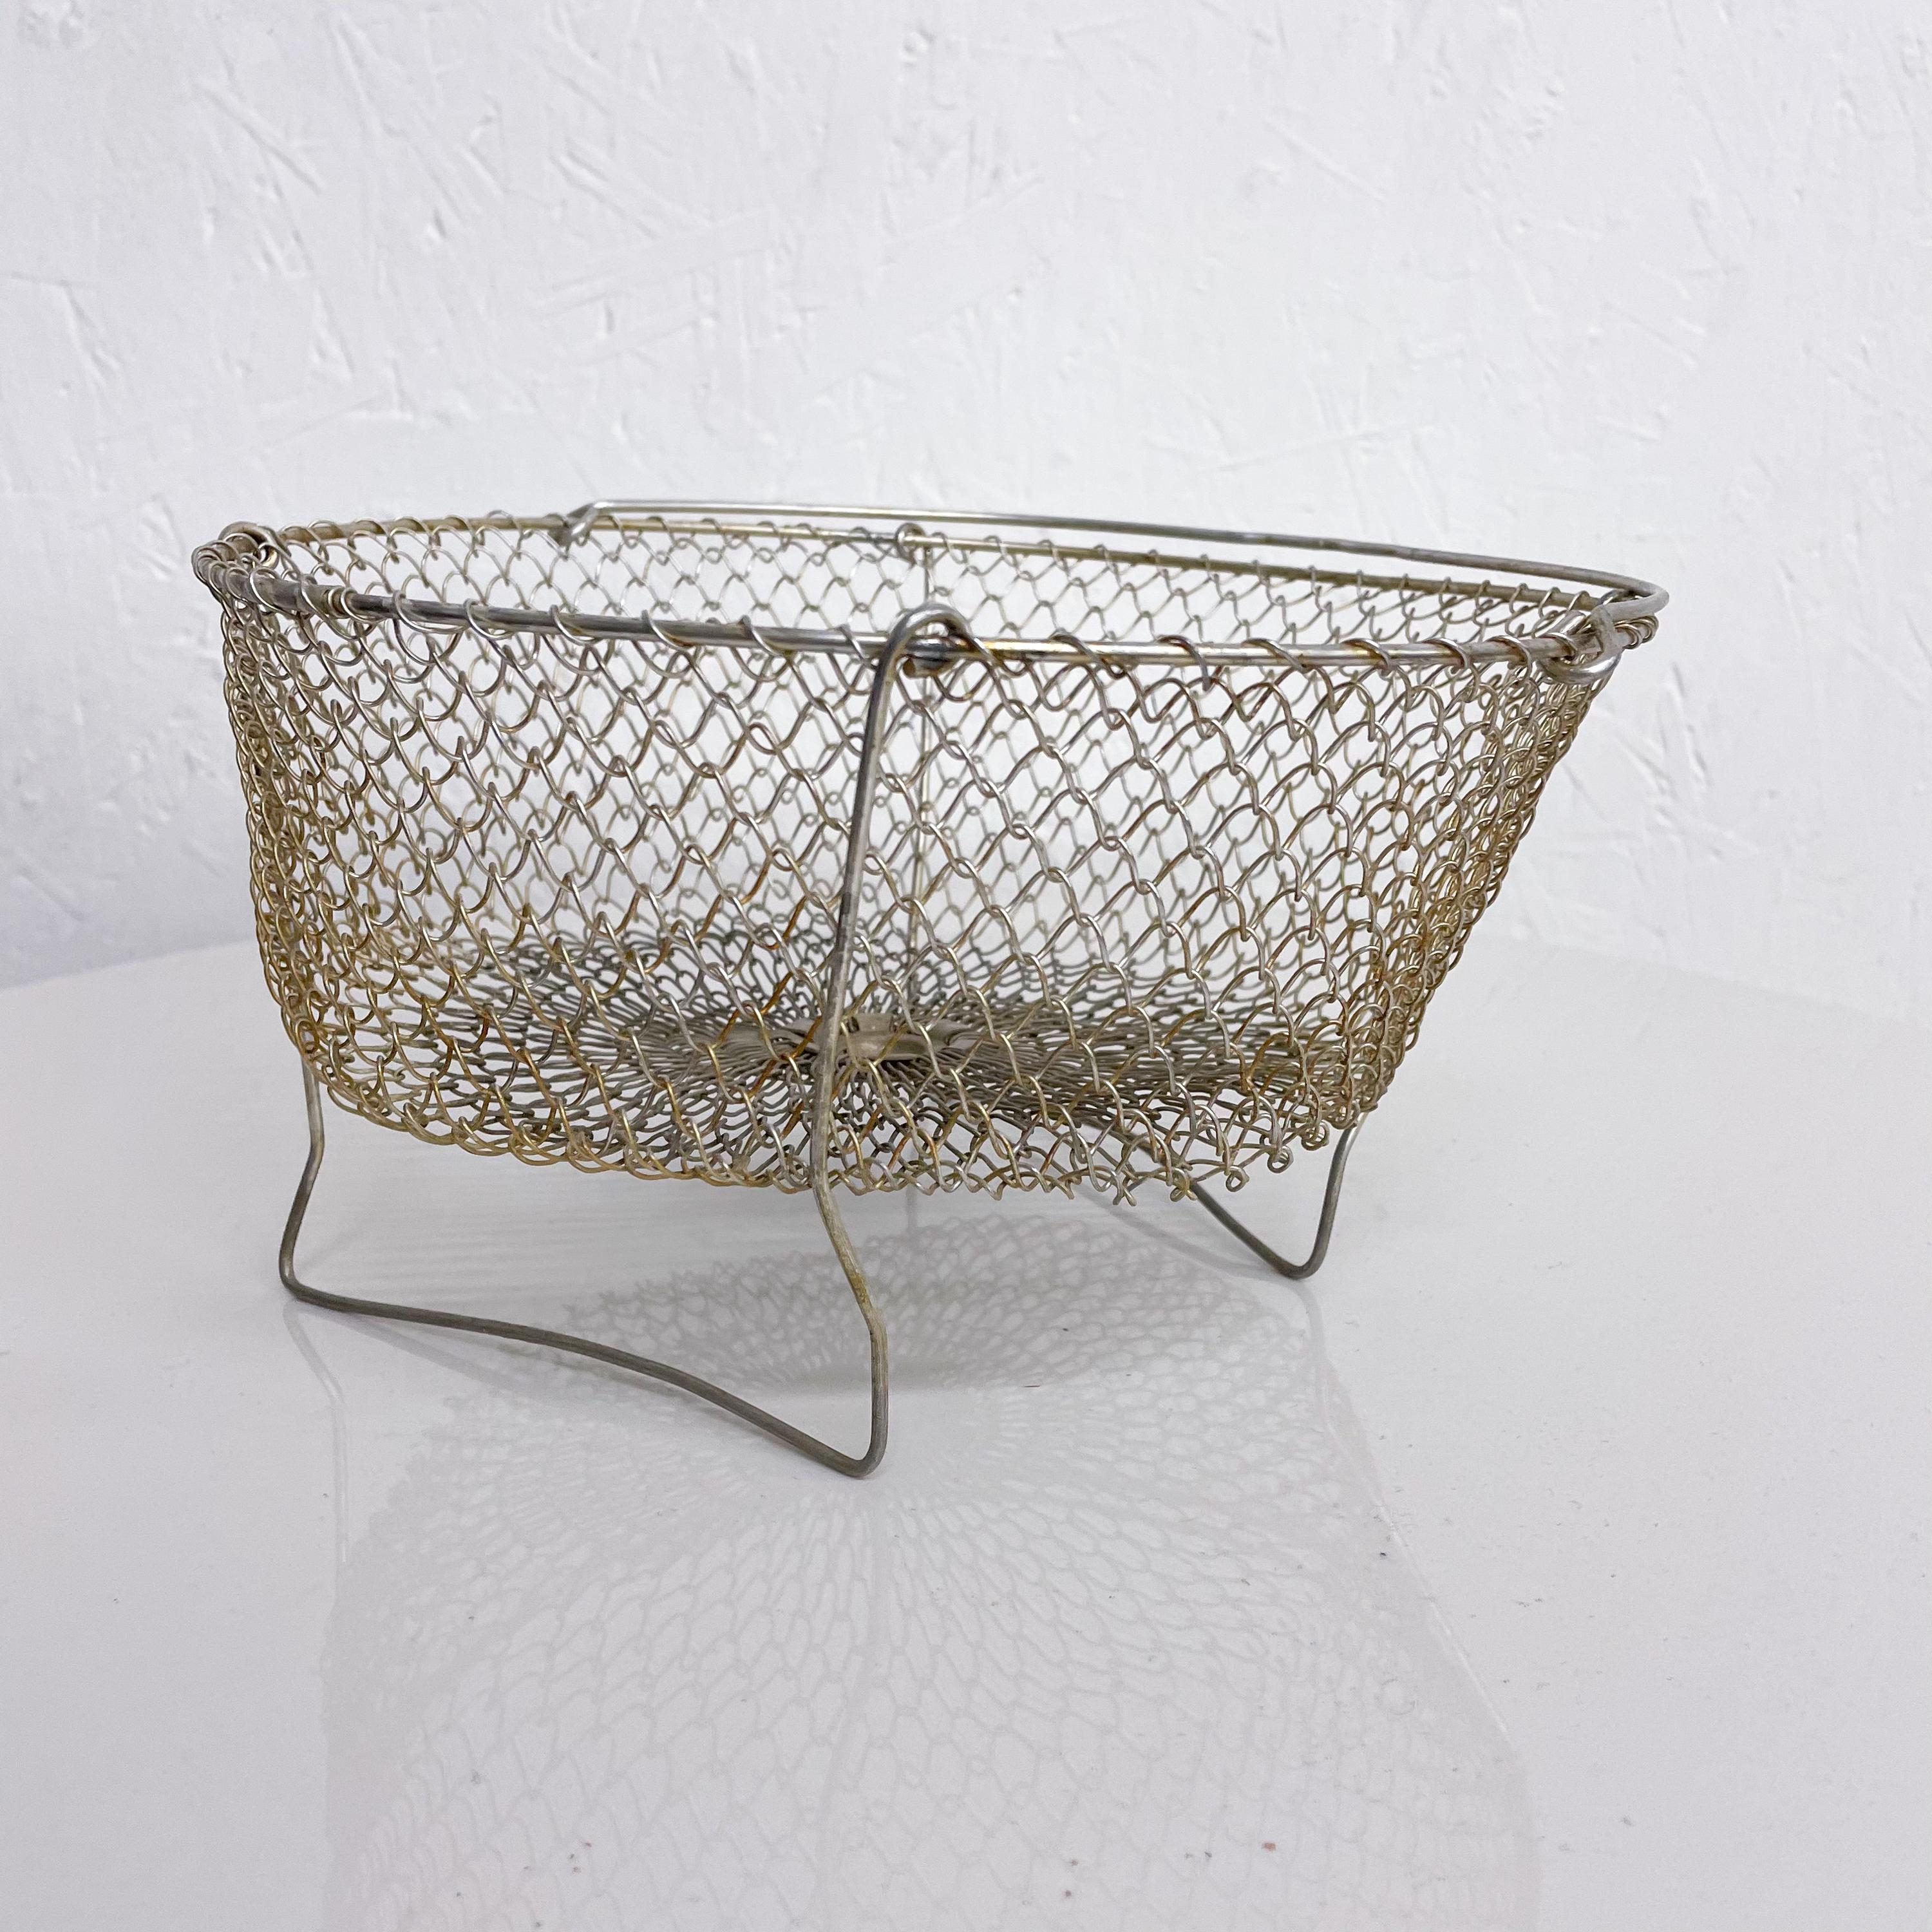 Made in France Wire Egg Basket Stand with Hand Carry Handle, Midcentury French Modern
Basket designed to hang as well. Kitchen storage piece. Easy hand carry.
Measures: 9.5 diameter x 5 height
Vintage original unrestored preowned condition. See our